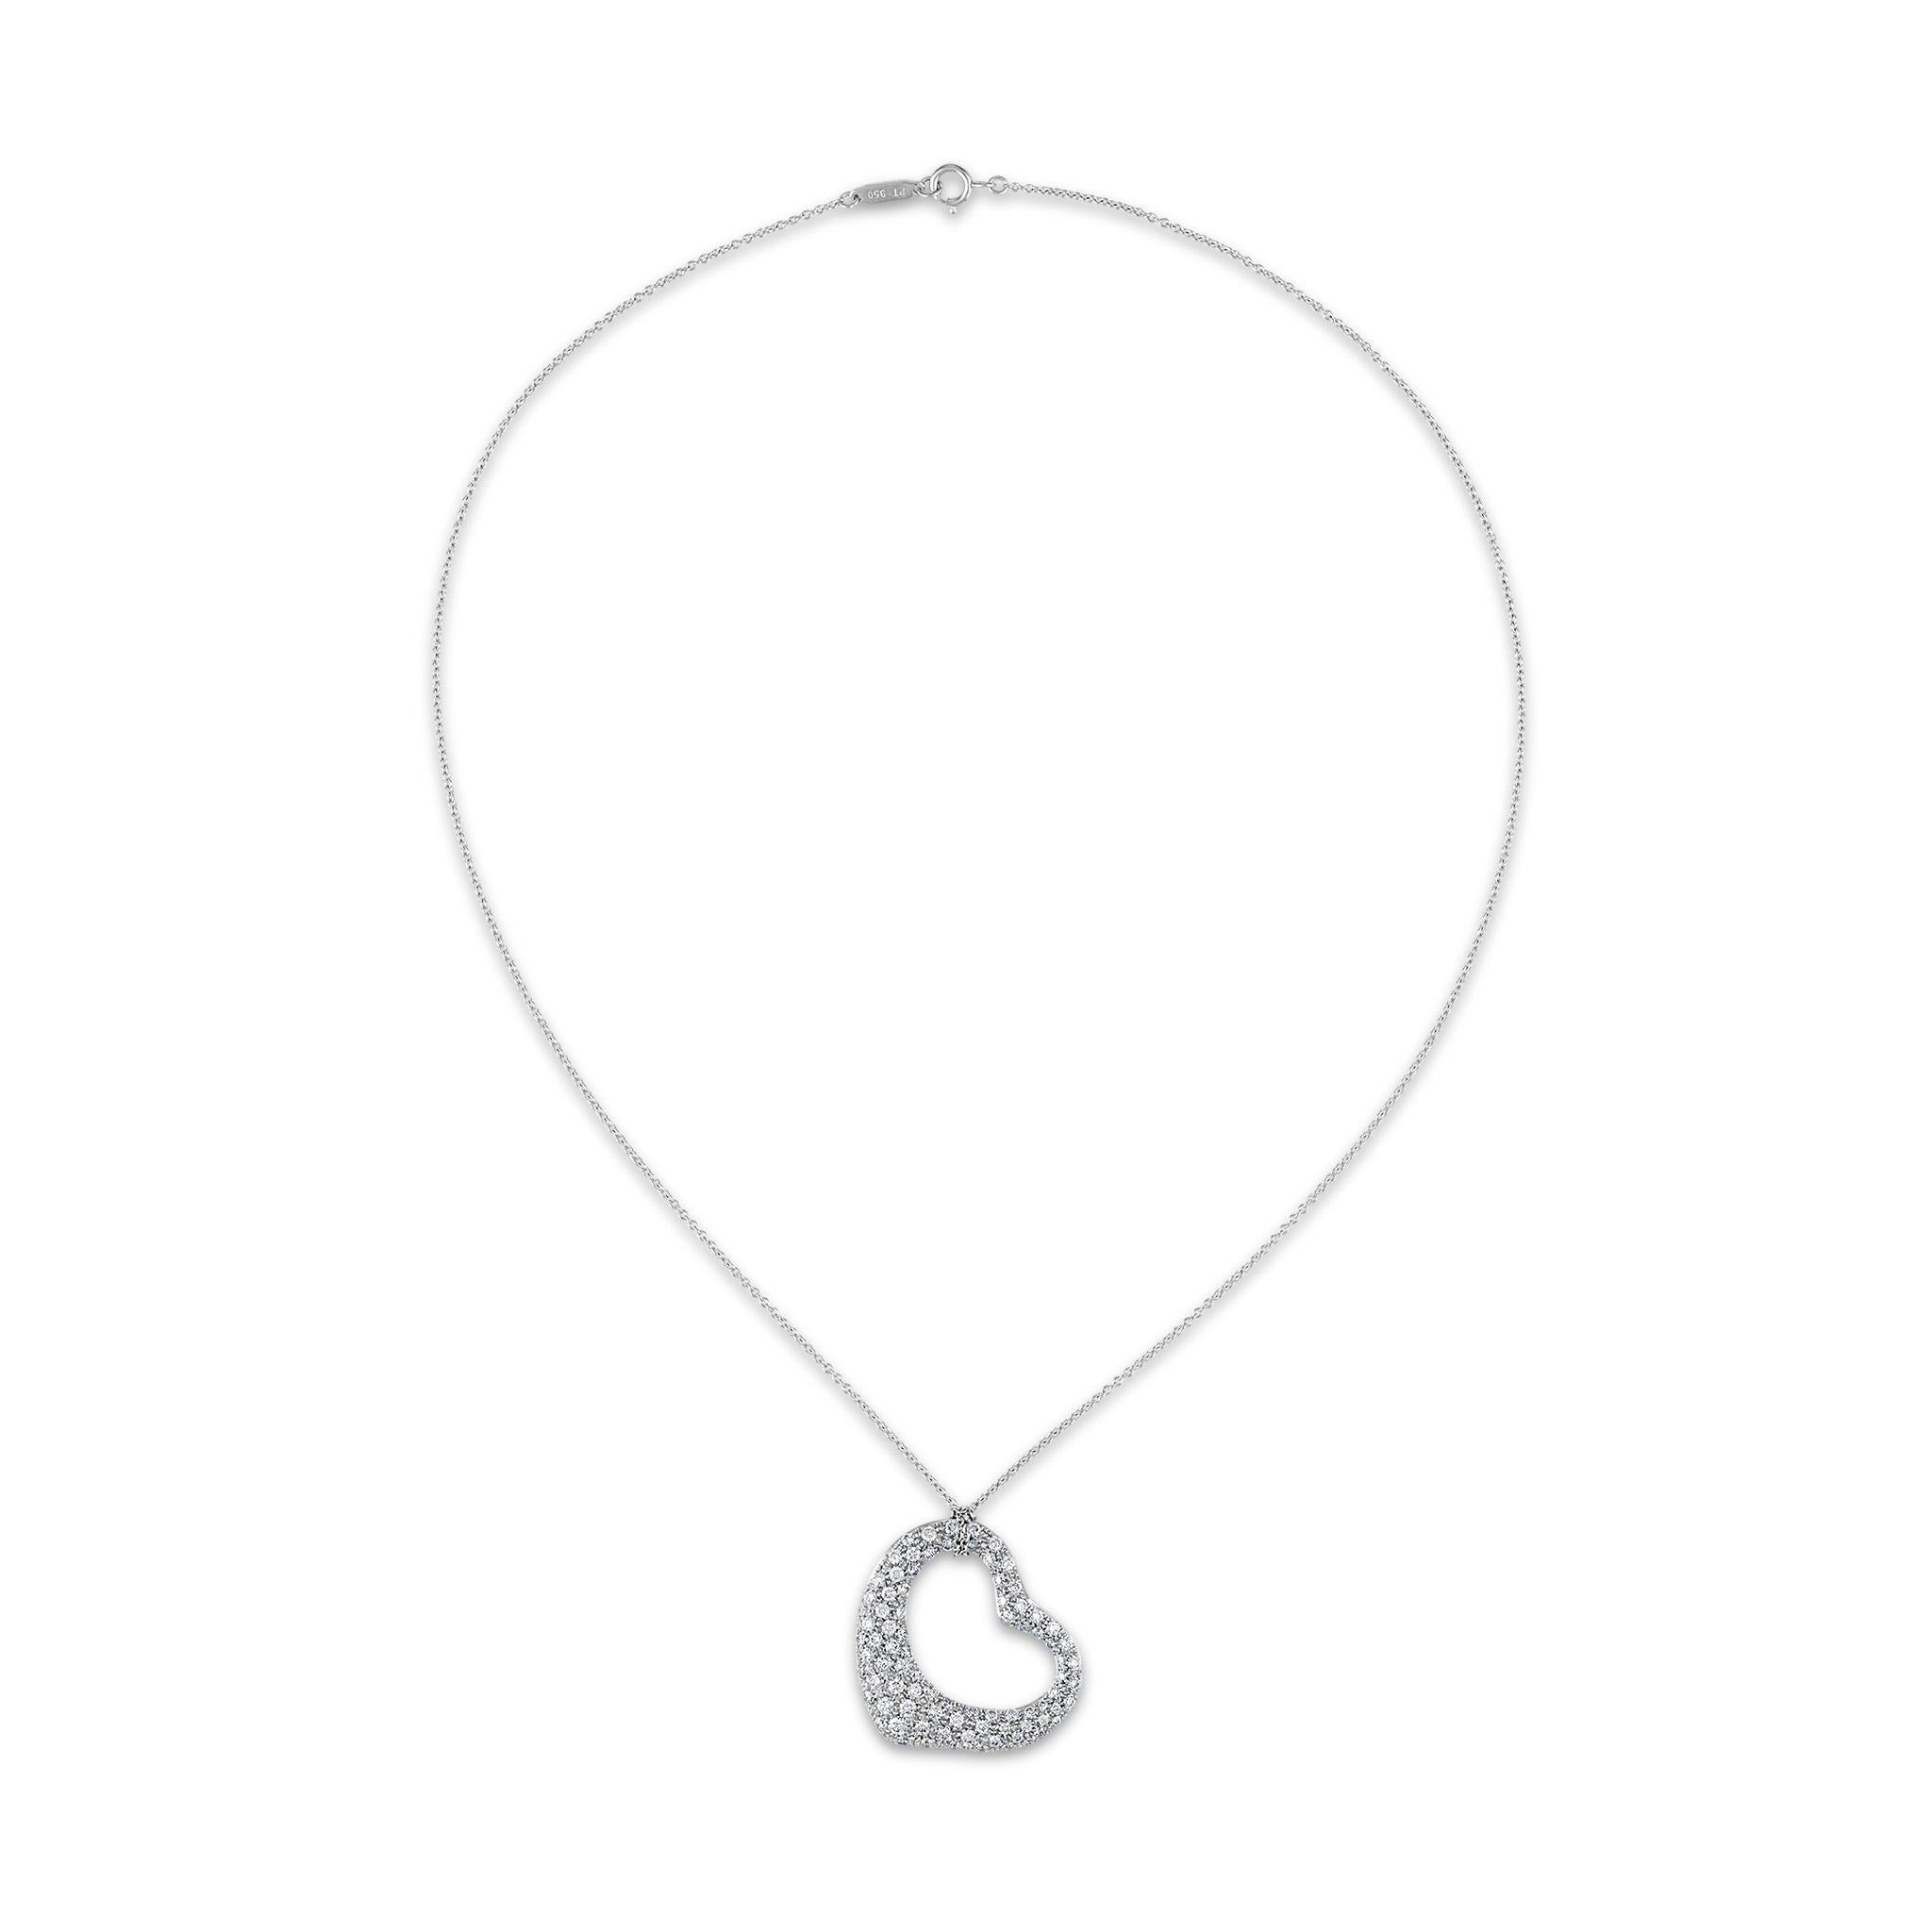 Platinum
Total Weight: 14.9 grams
Diamond: 3.40 ct twd
Chain Length: 17 inches
Heart- 23mm-L   28mm-W